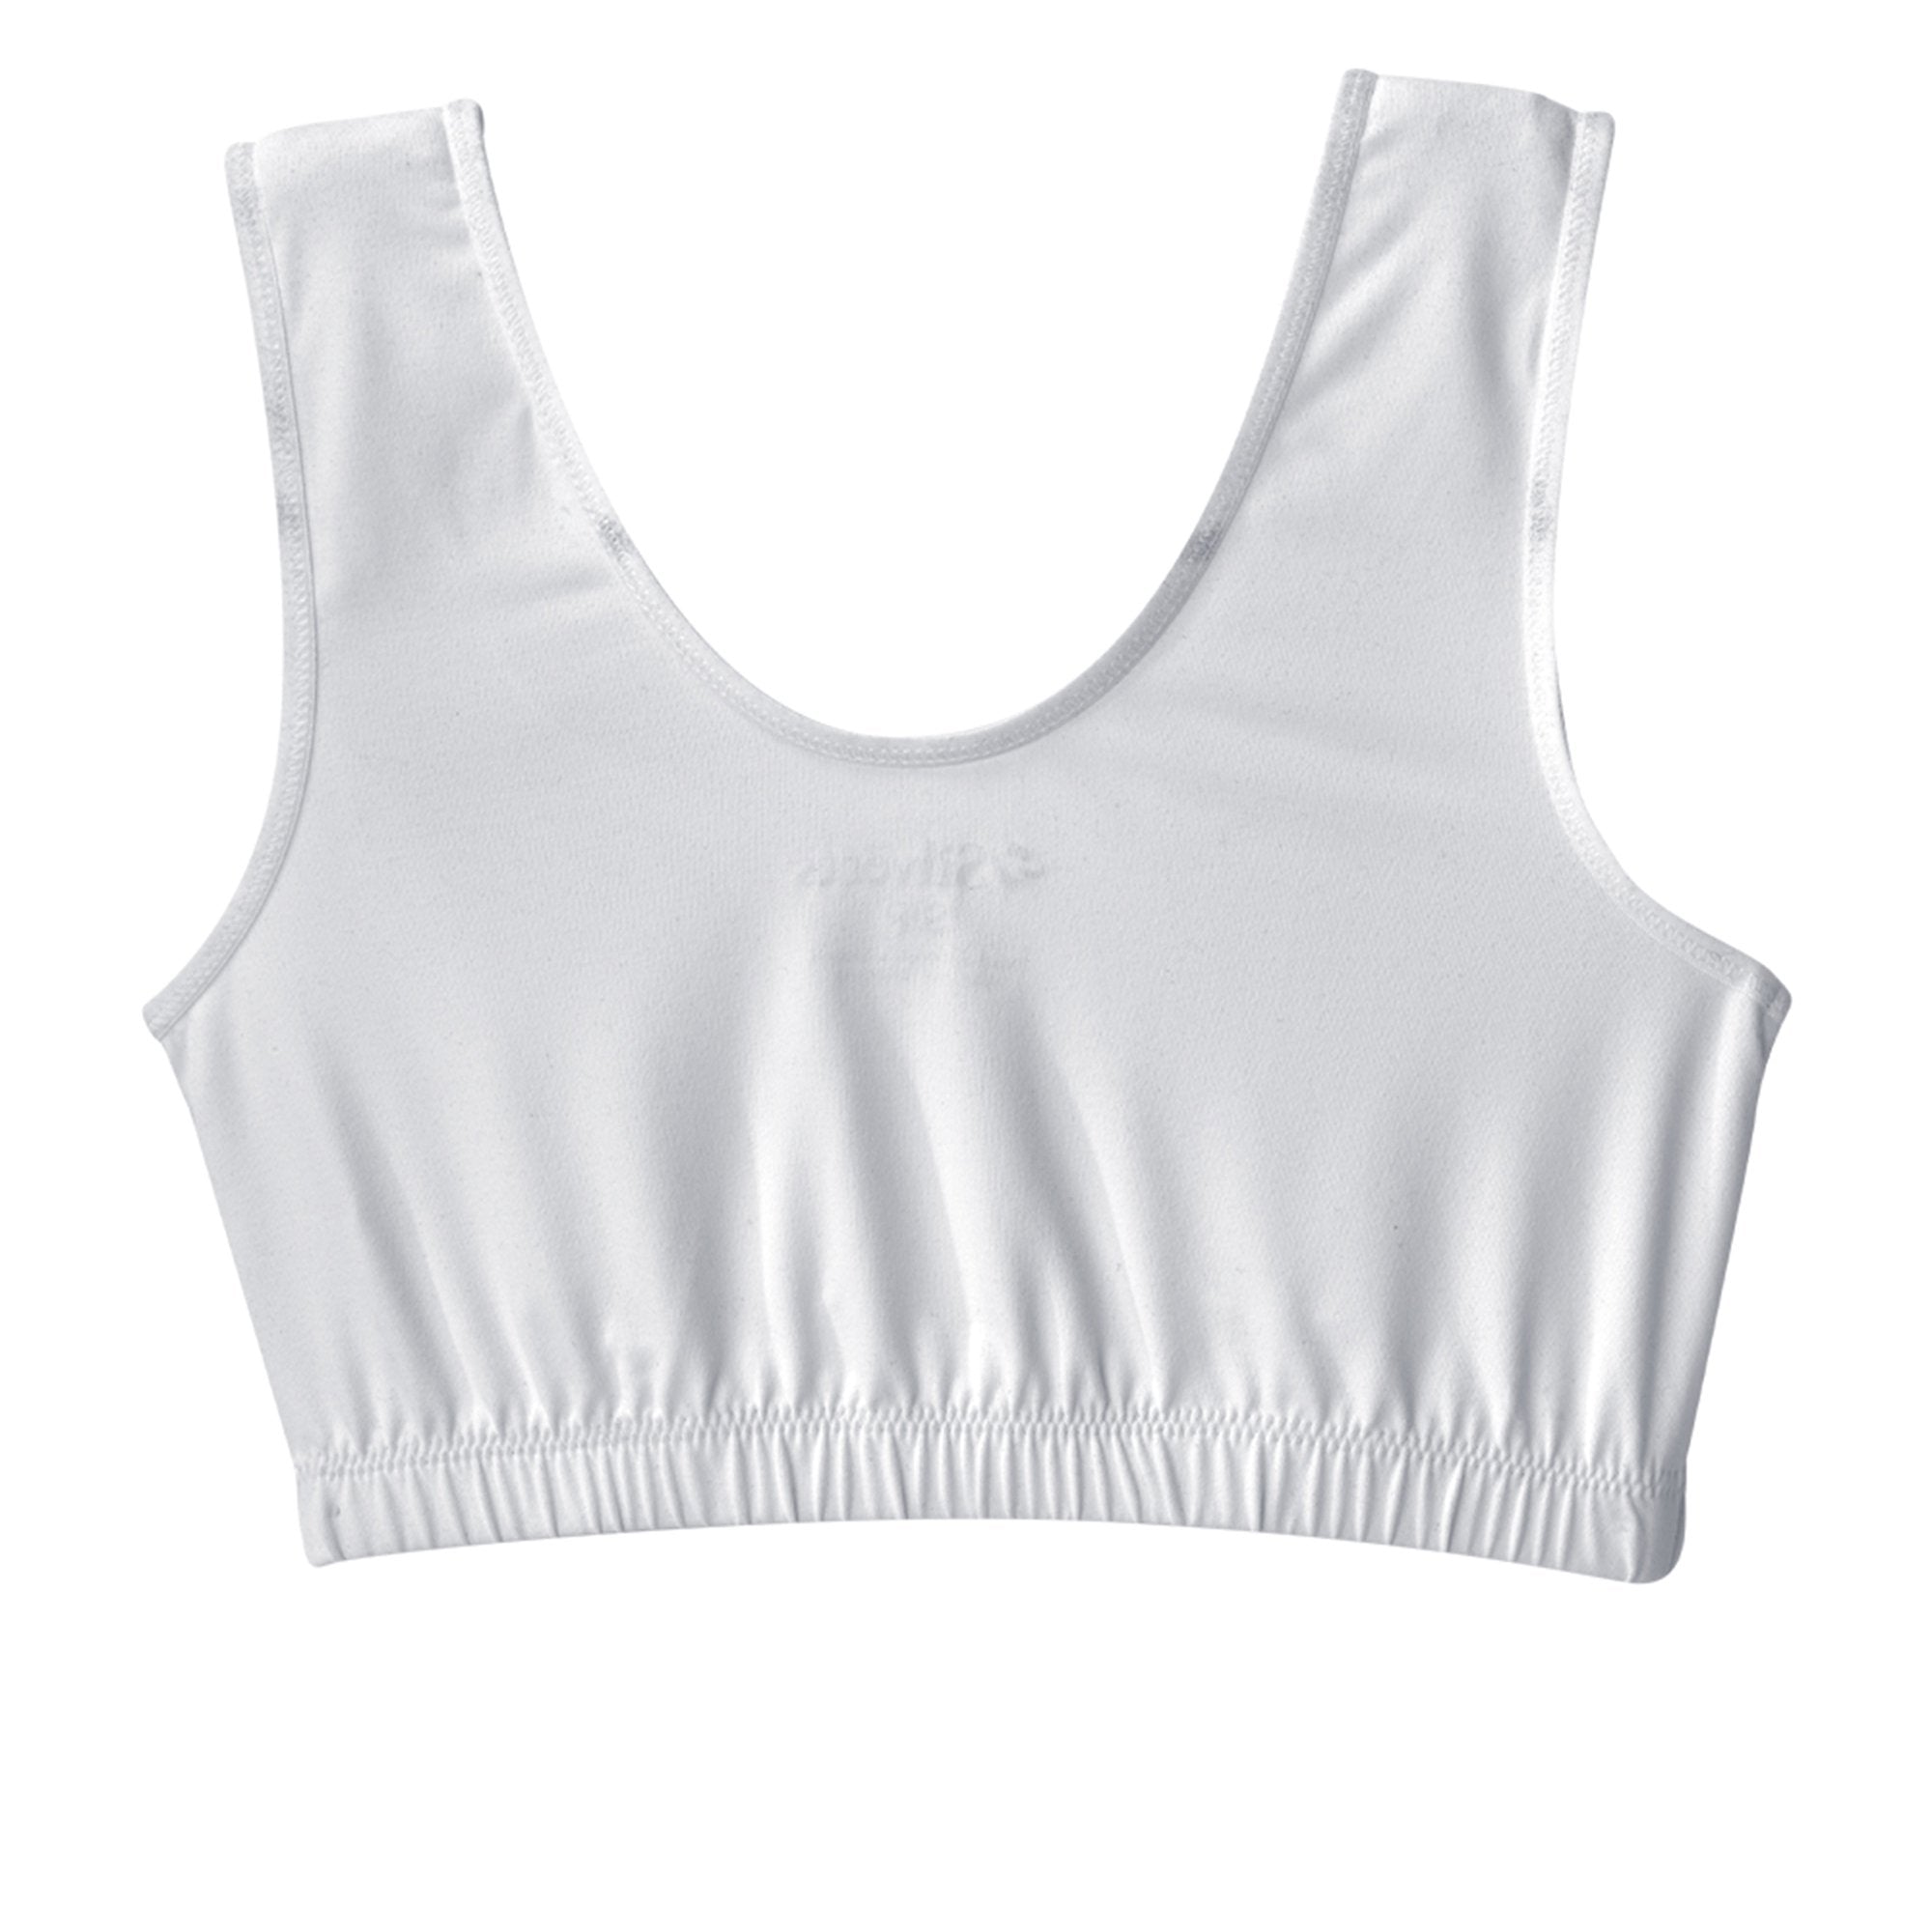 Adaptive Front Closure Bra Silverts® Eezee White X-Large 40 to 43 Inch